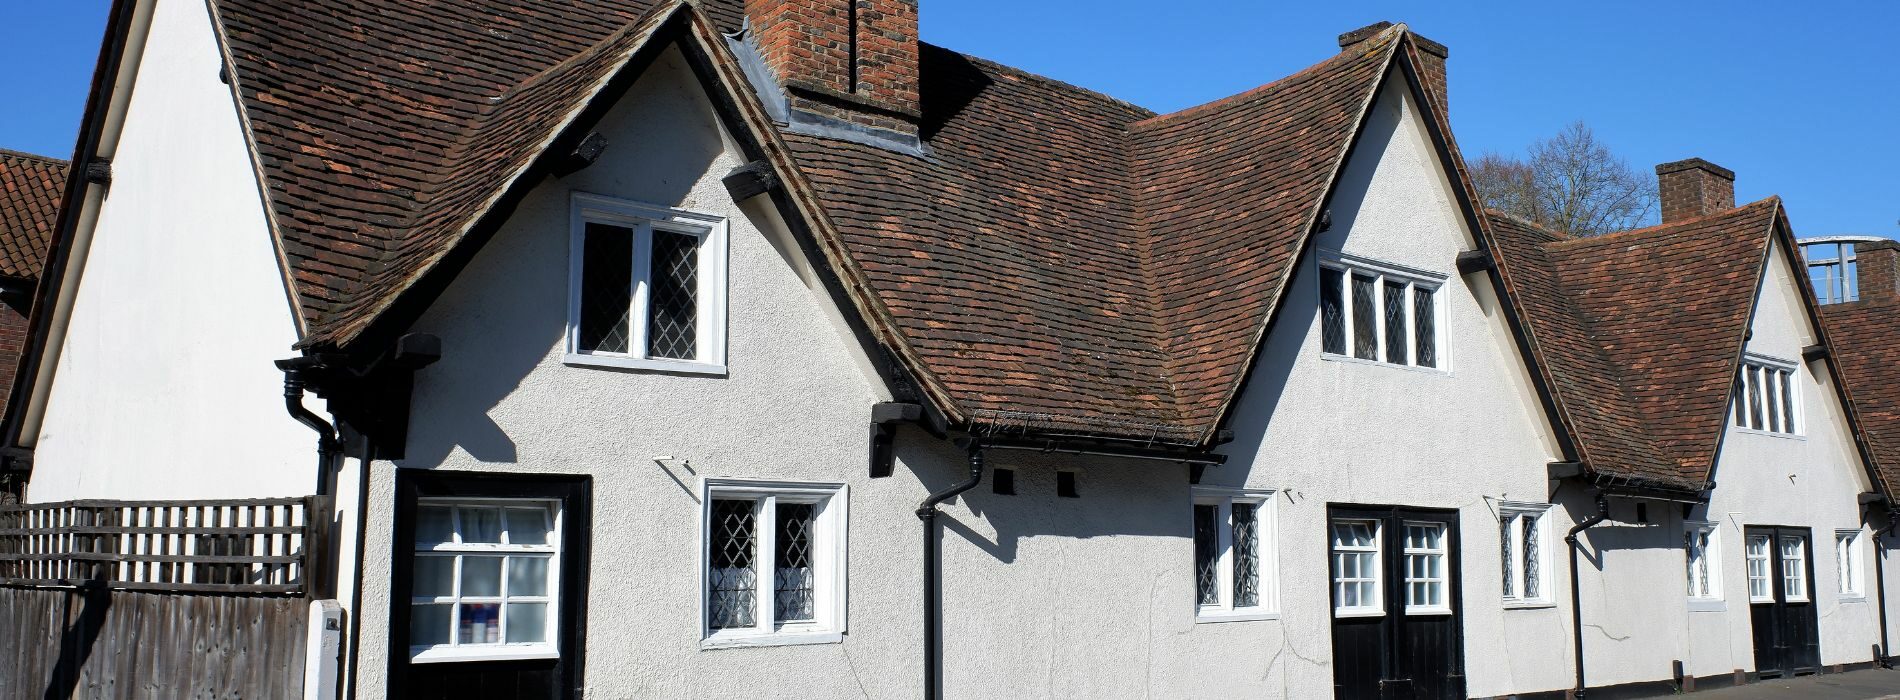 Experience the allure of charming white houses with brown roofs in Watford. 